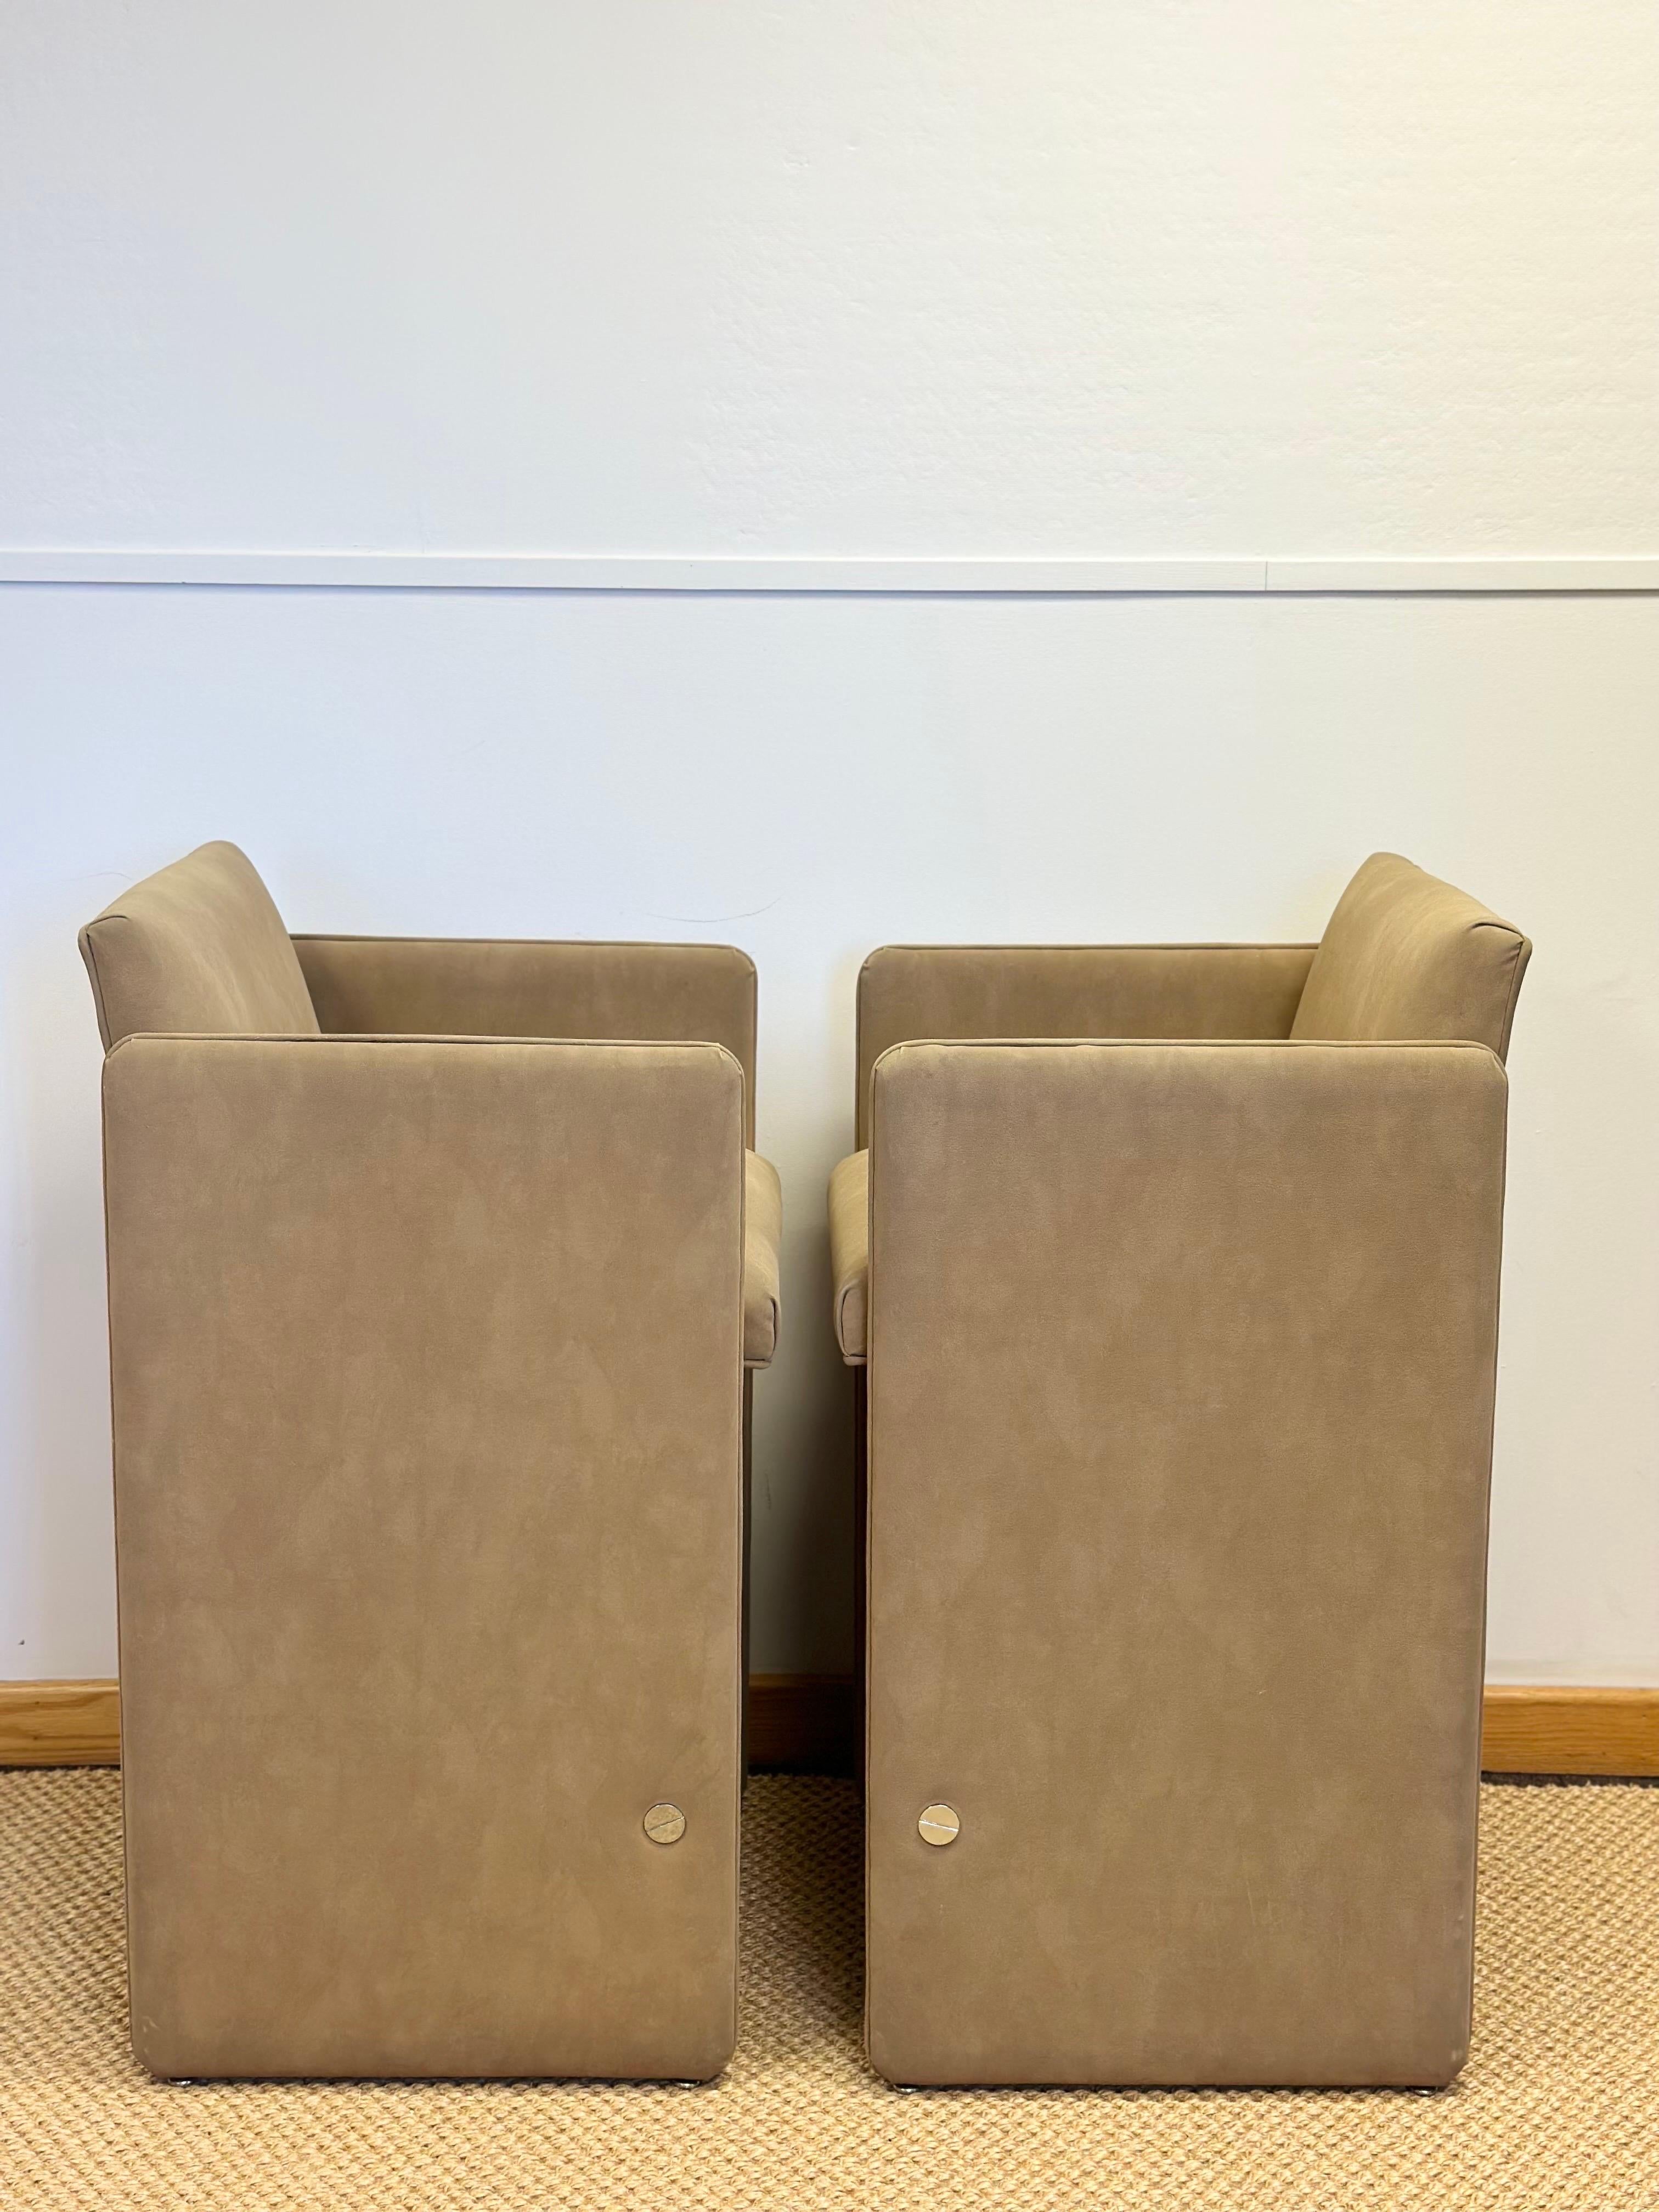 Faux Leather 1980s Sculptural Italian Postmodern Faux Tan Suede Bar Stools – a Pair  For Sale